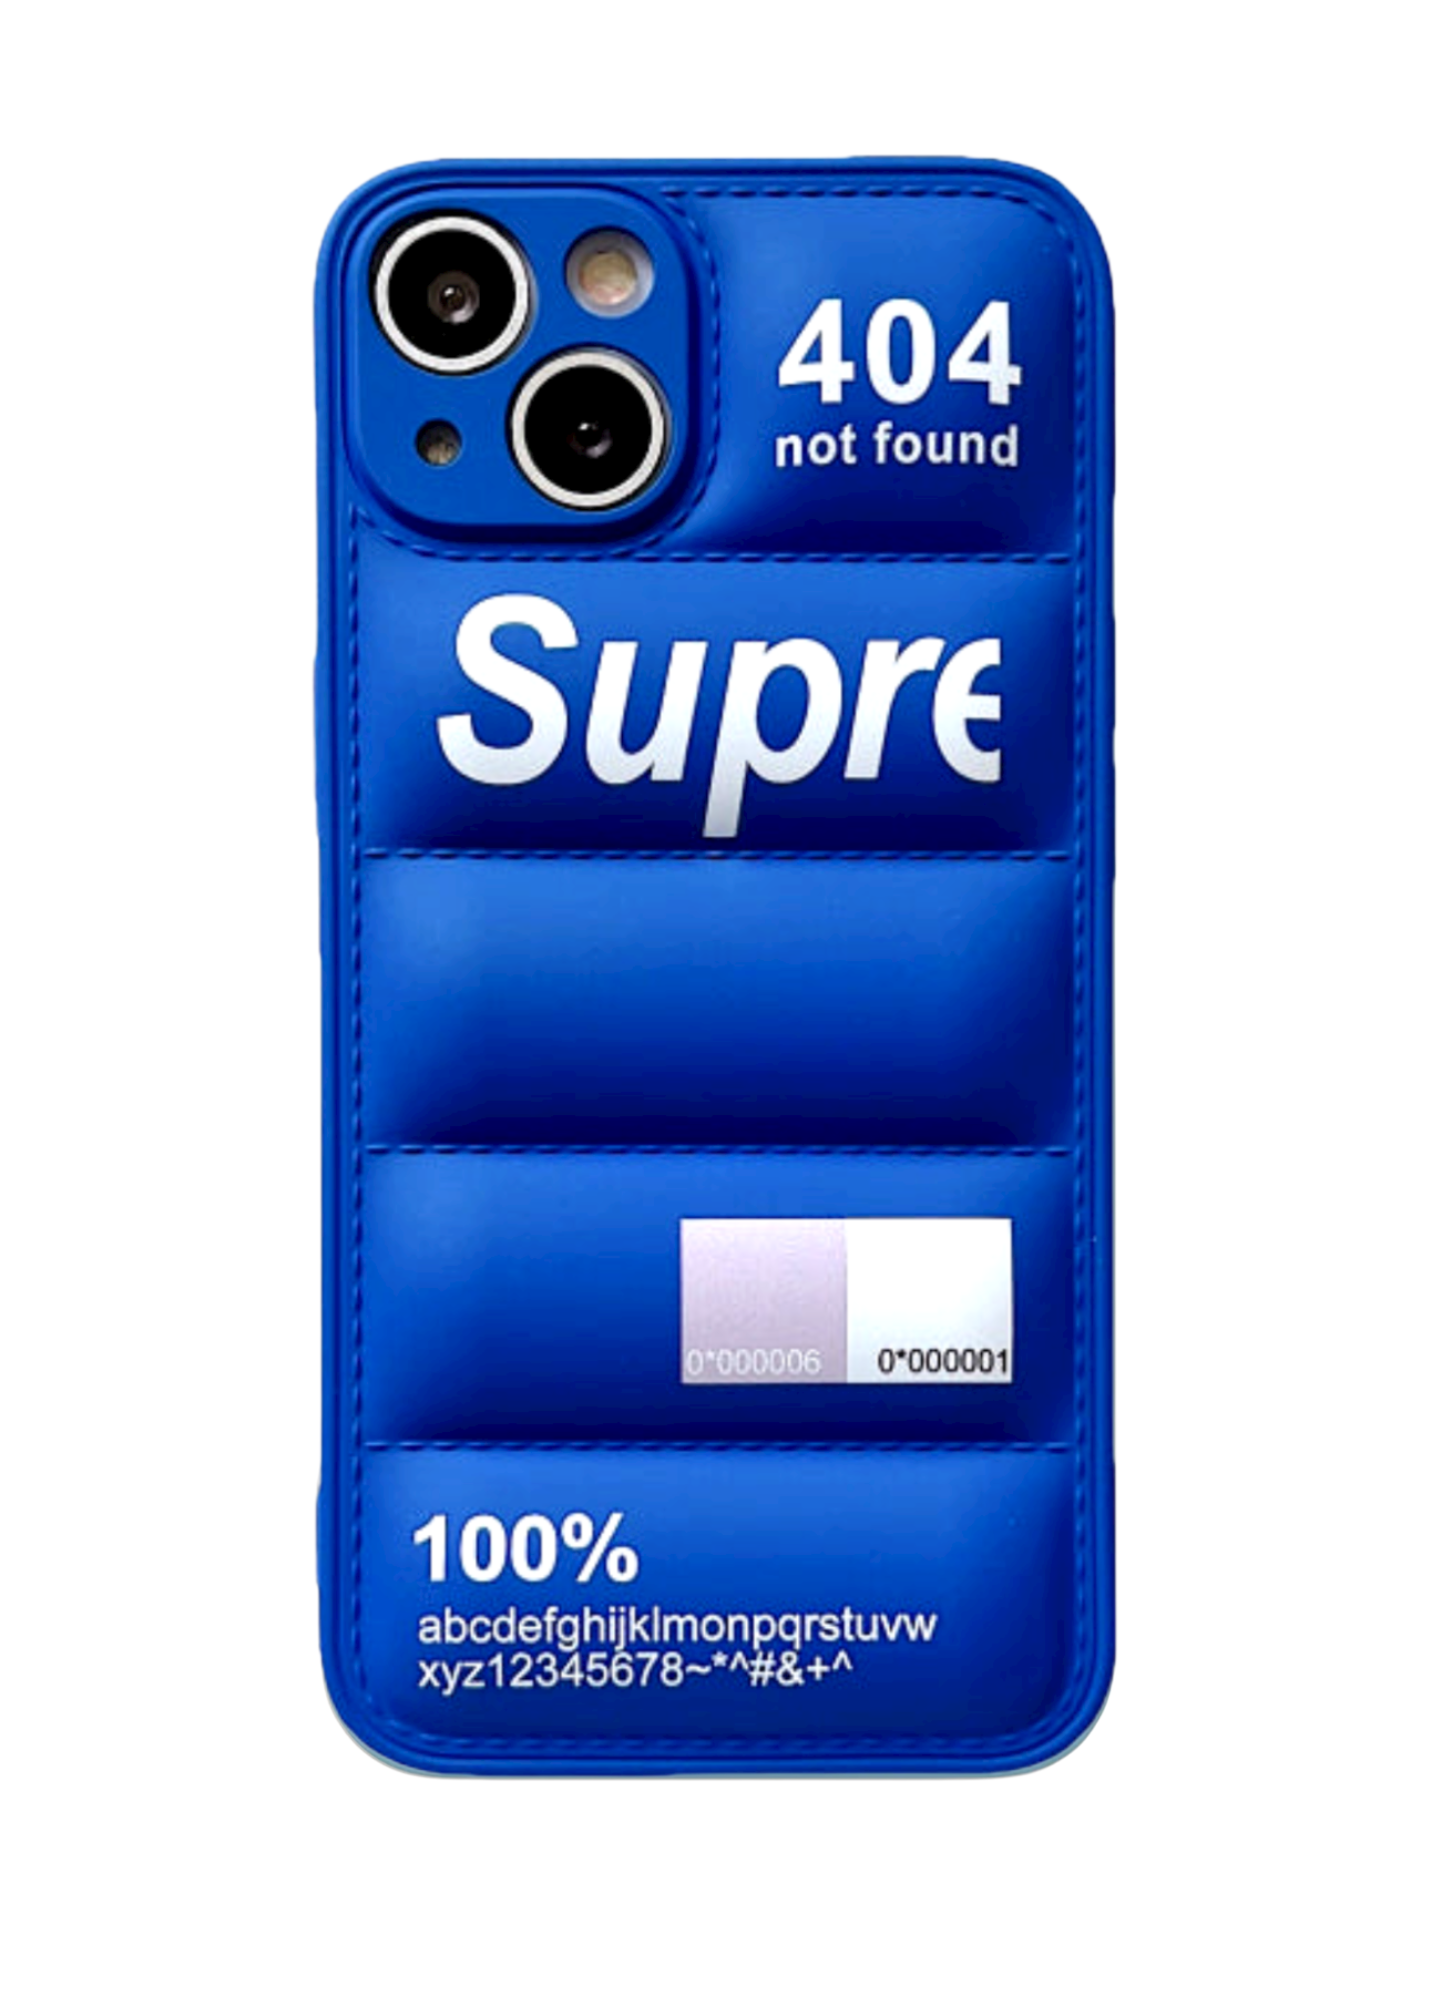 Supreme Phone Back Cover iPhone13 Case Protection shockproof Mirror Phone  cases SUP Superme SUP Supreme Design iPhone13 Phone case